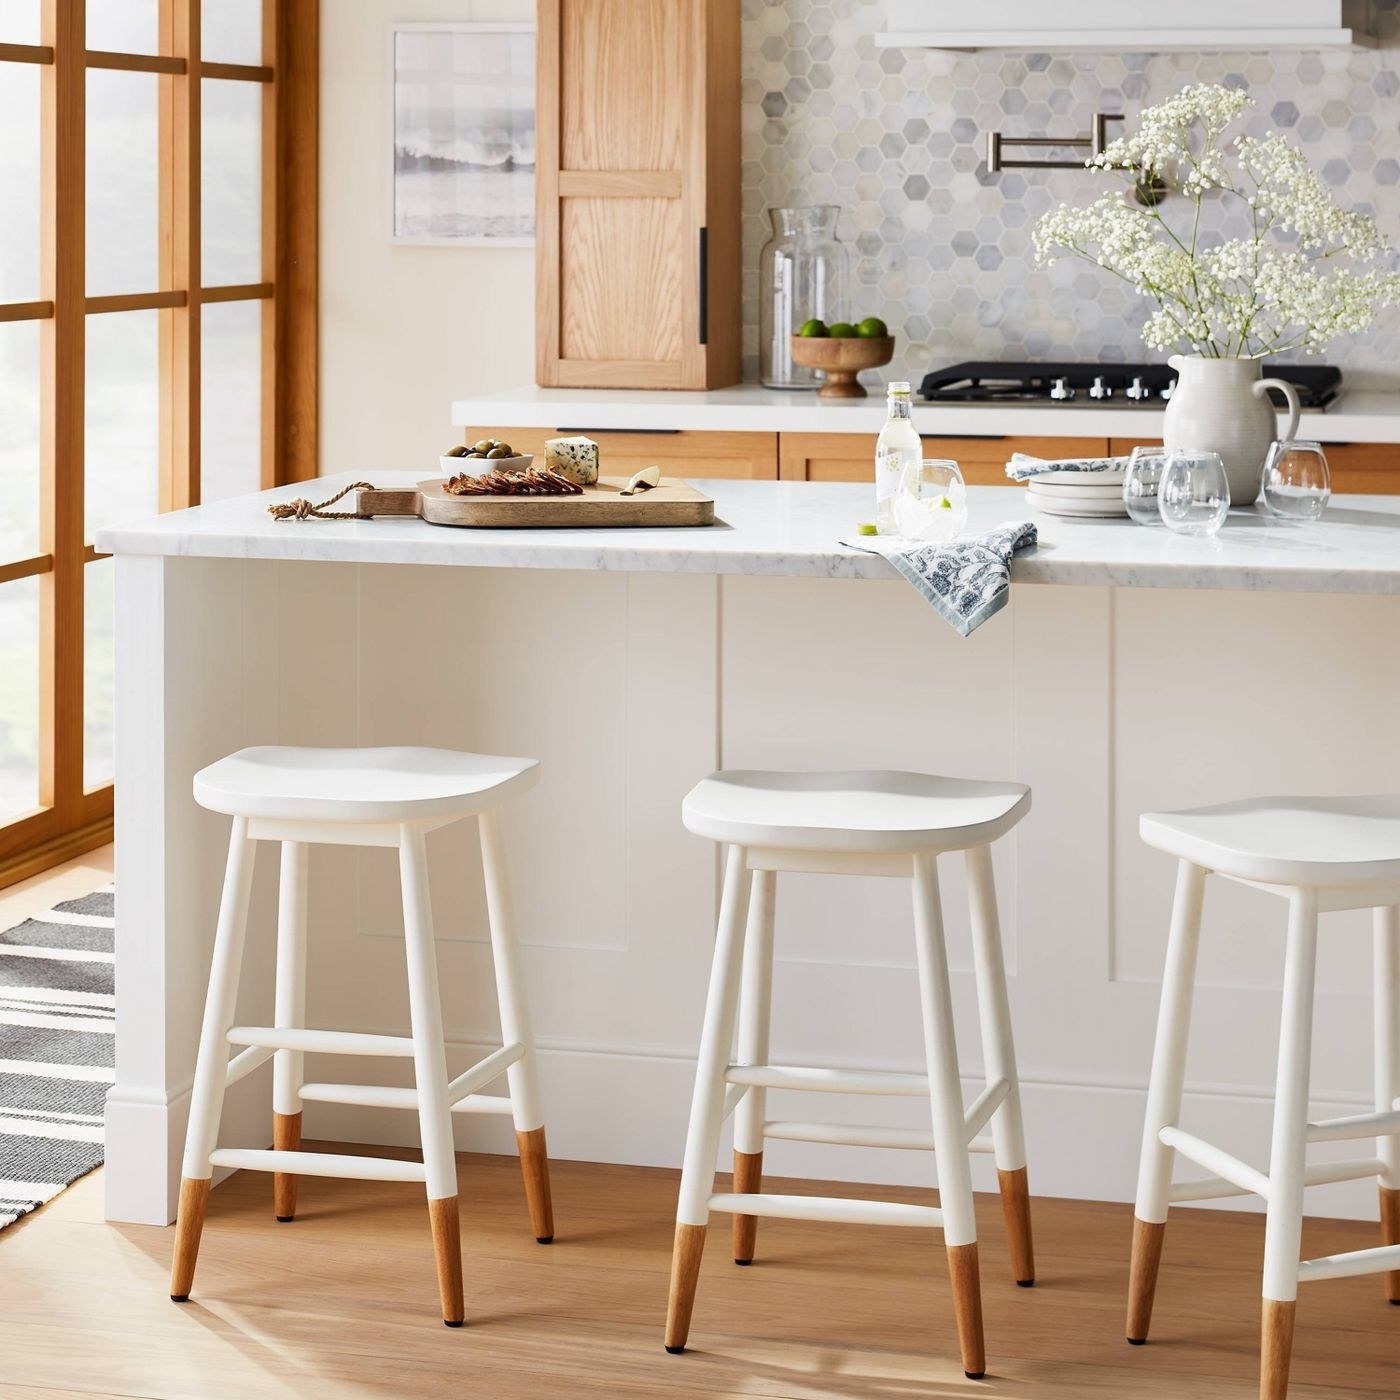 white counterstools with curved saddle seats next to a counter